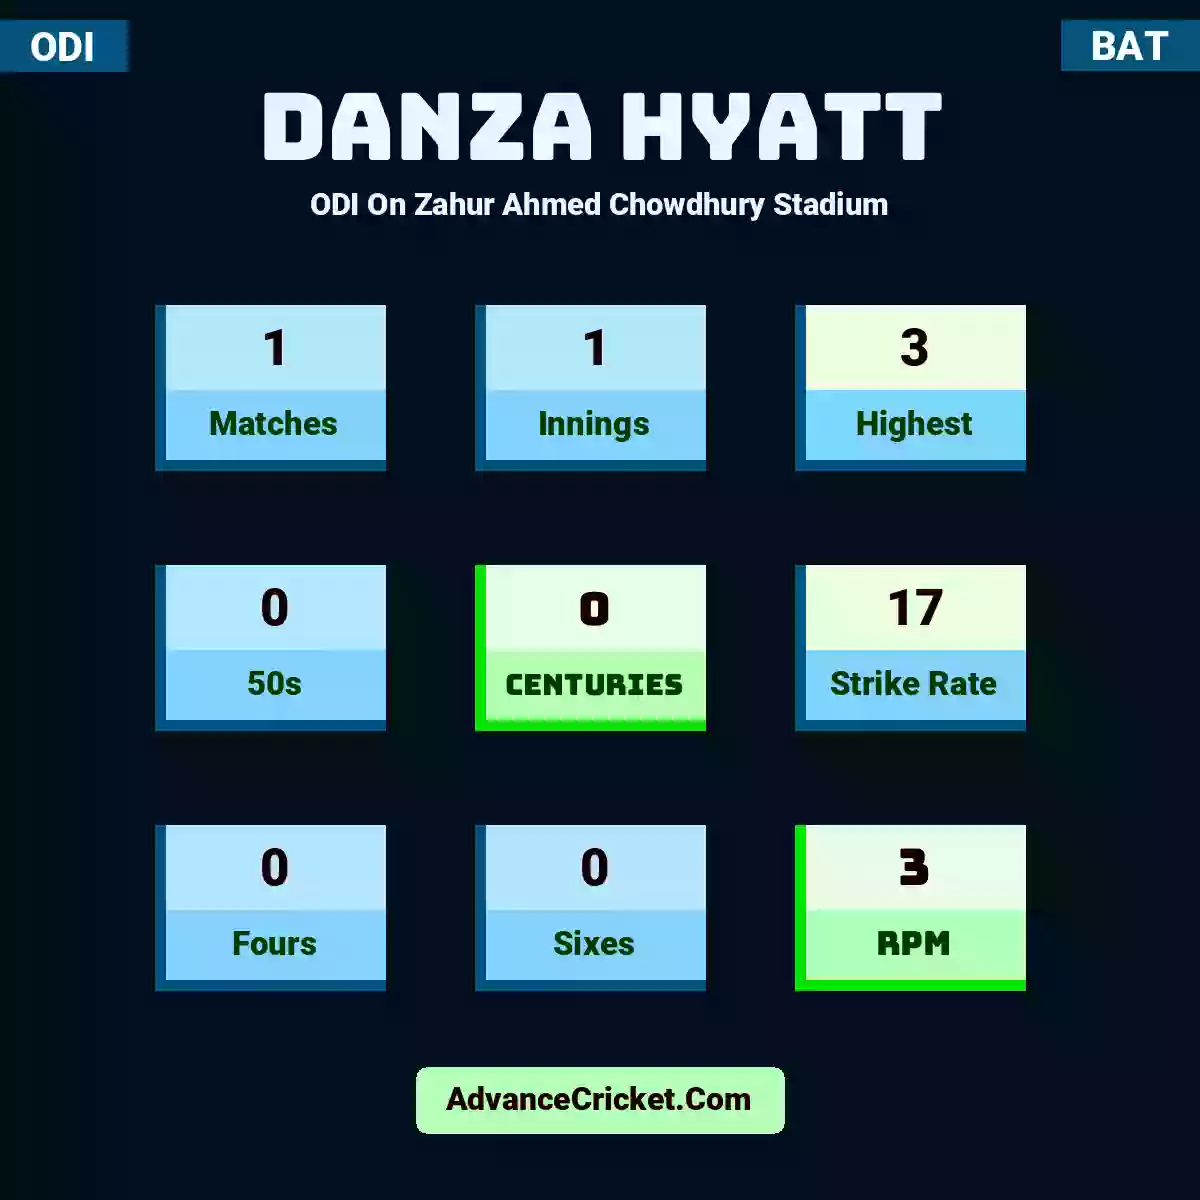 Danza Hyatt ODI  On Zahur Ahmed Chowdhury Stadium, Danza Hyatt played 1 matches, scored 3 runs as highest, 0 half-centuries, and 0 centuries, with a strike rate of 17. D.Hyatt hit 0 fours and 0 sixes, with an RPM of 3.